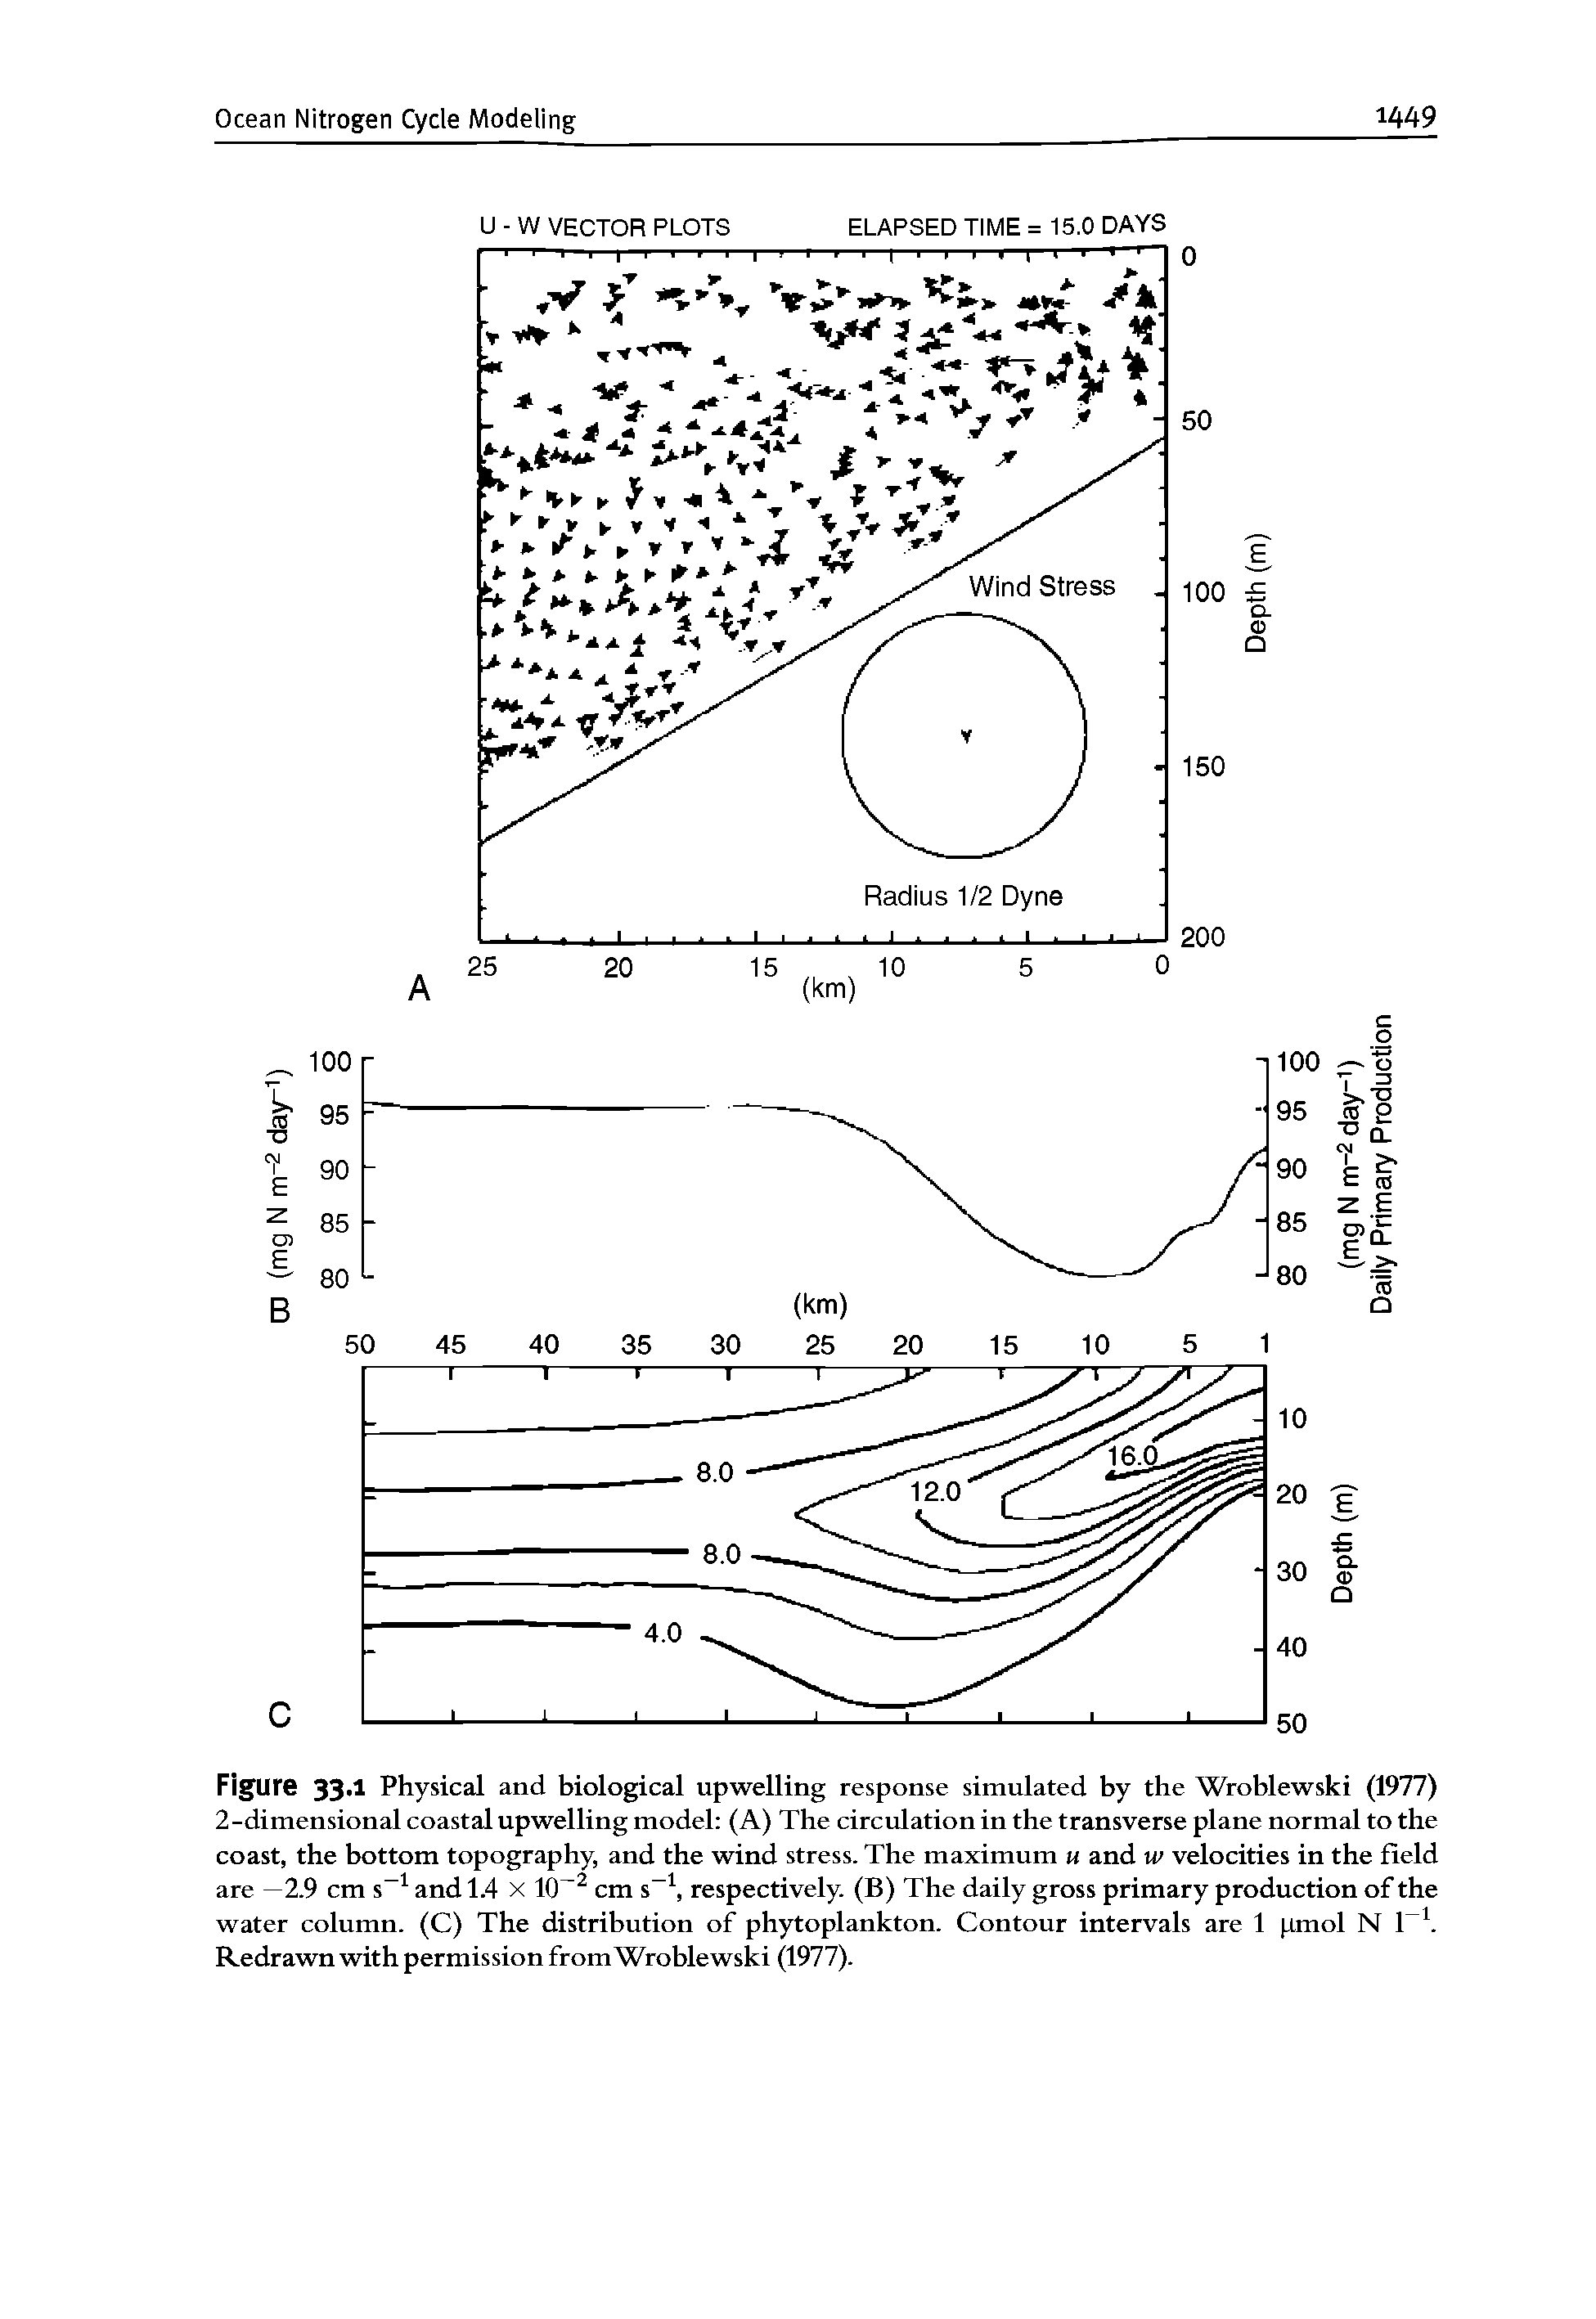 Figur 33 1 Physical and biological upwelling response simulated by the Wroblewski (1977) 2-dimensional coastal upwelling model (A) The circulation in the transverse plane normal to the coast, the bottom topography, and the wind stress. The maximum u and w velocities in the field are —2.9 cm s and 1.4 x 10 cm s , respectively. (B) The daily gross primary production of the water column. (C) The distribution of phytoplankton. Contour intervals are 1 jimol N 1. Redrawn with permission from Wroblewski (1977).